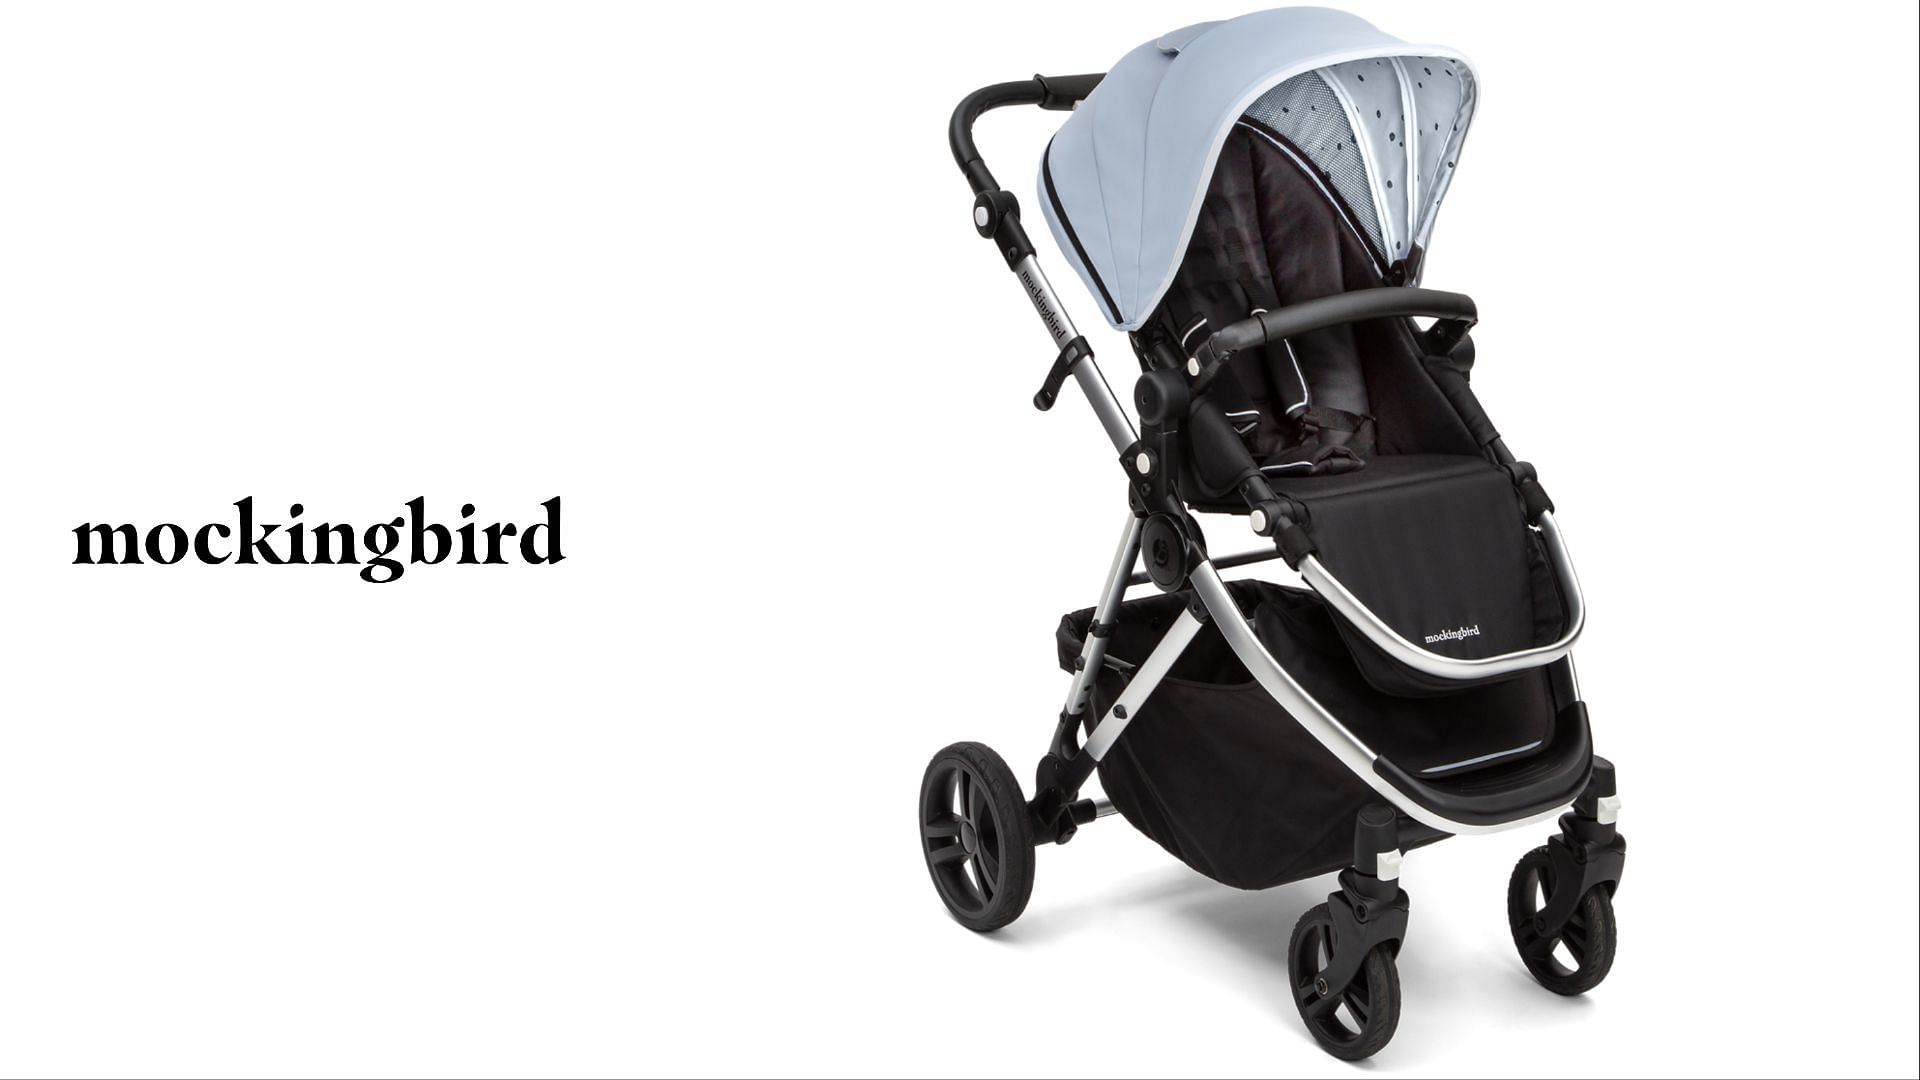 The recalled Mockingbird Single Strollers are feared to show signs of crack and pose a falling risk to children (Image via CPSC)